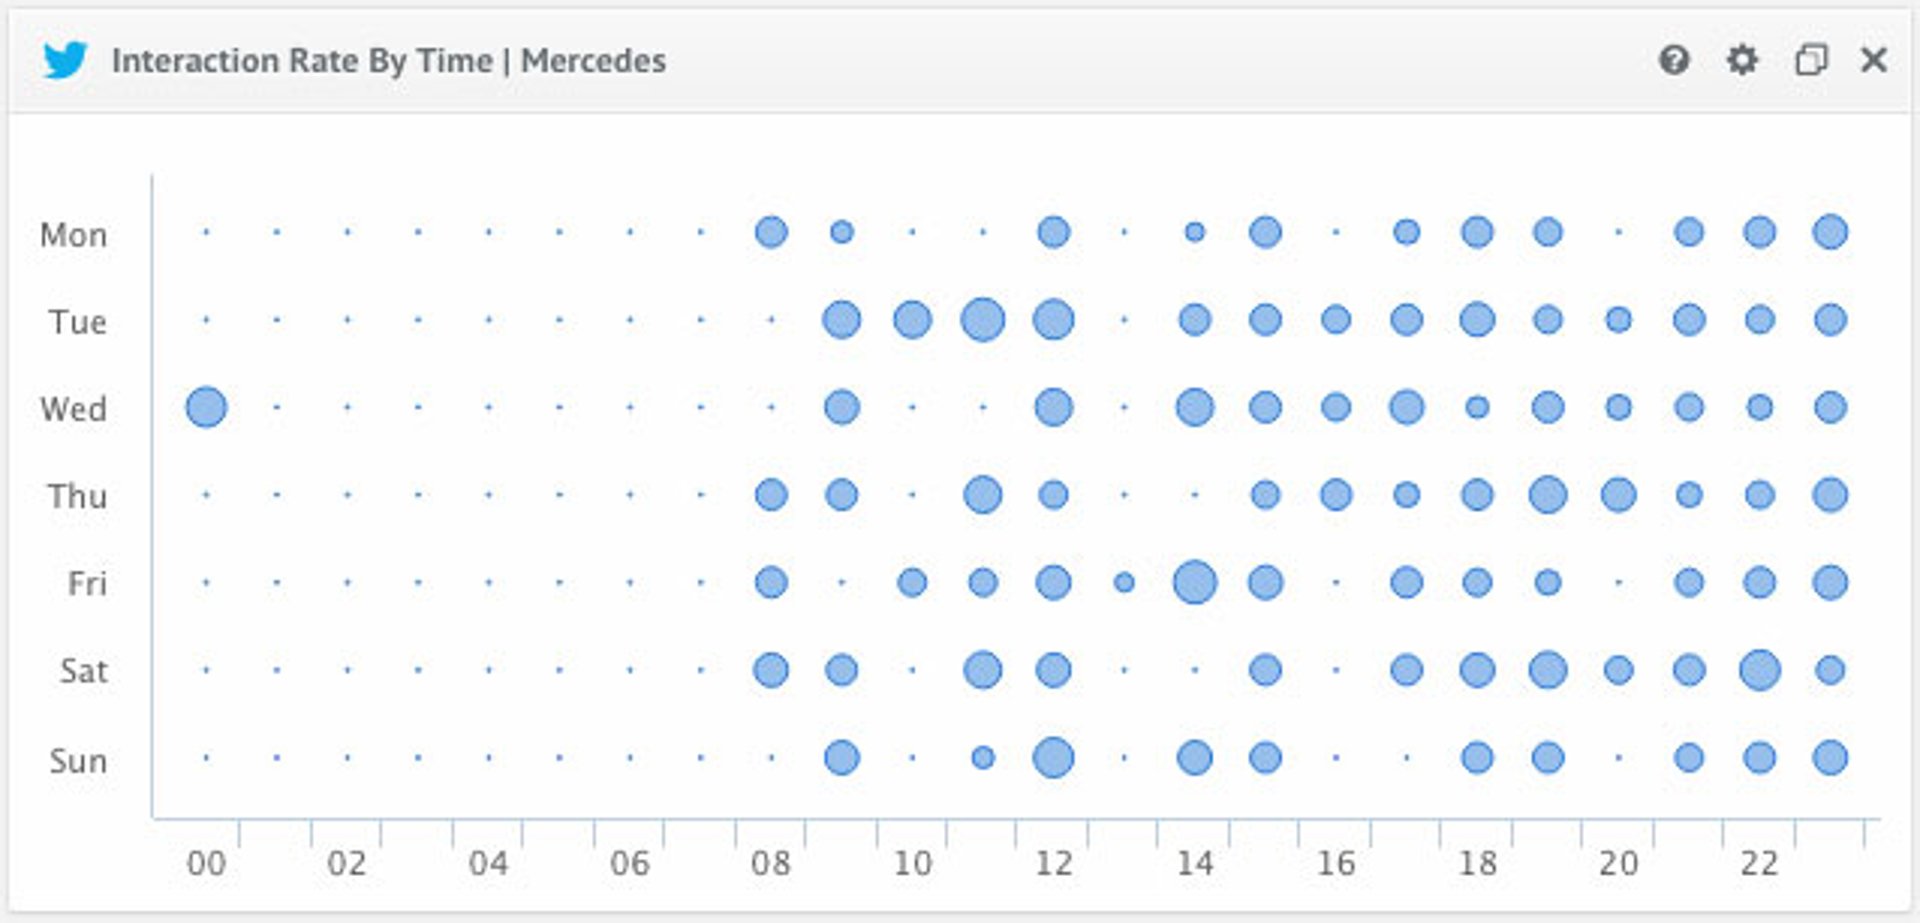 Interaction Rate by Time Mercedes